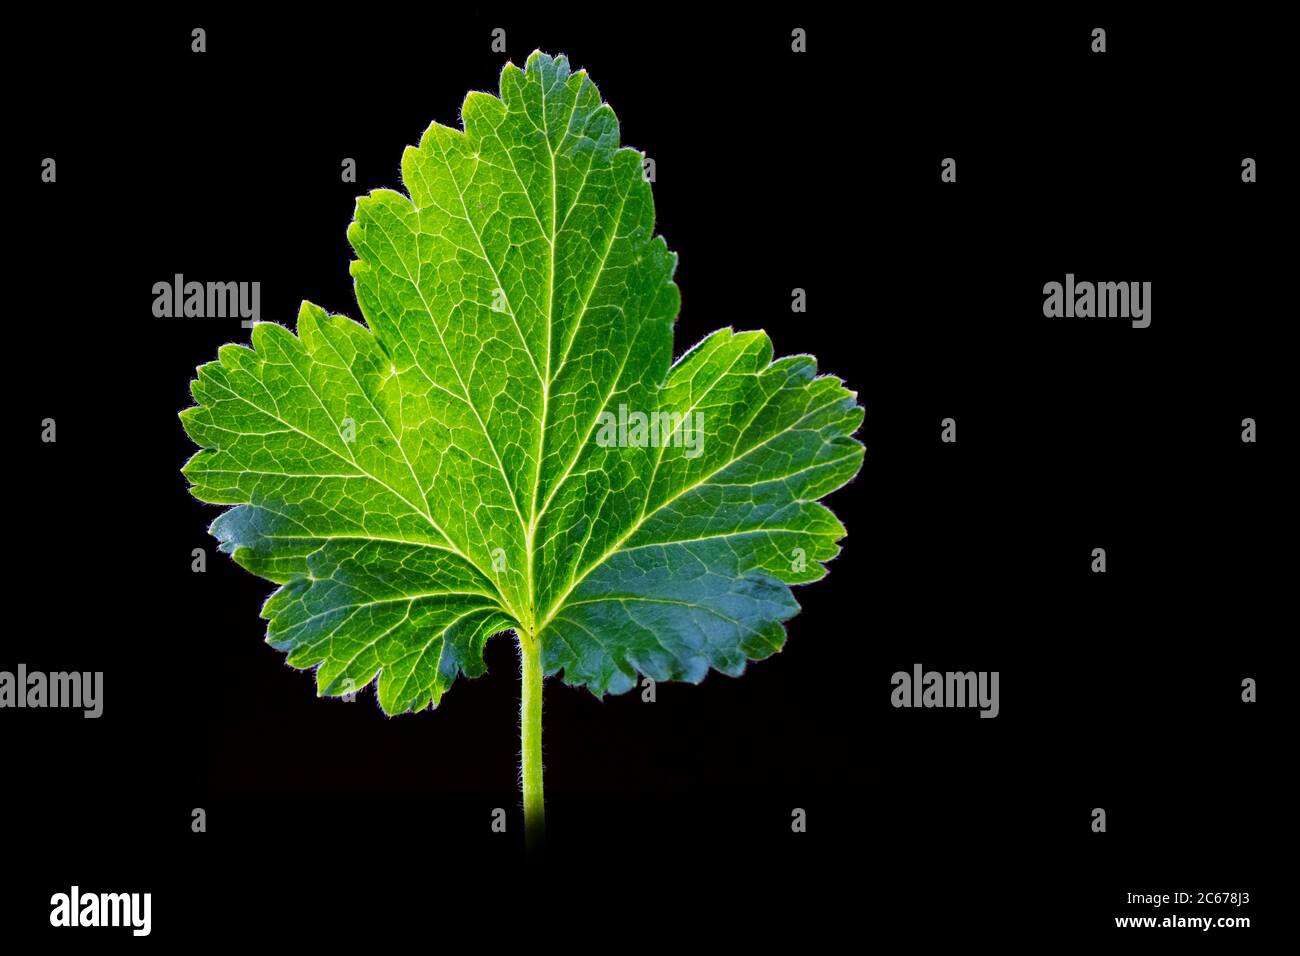 Leaf of a Black Currant with dark background Stock Photo